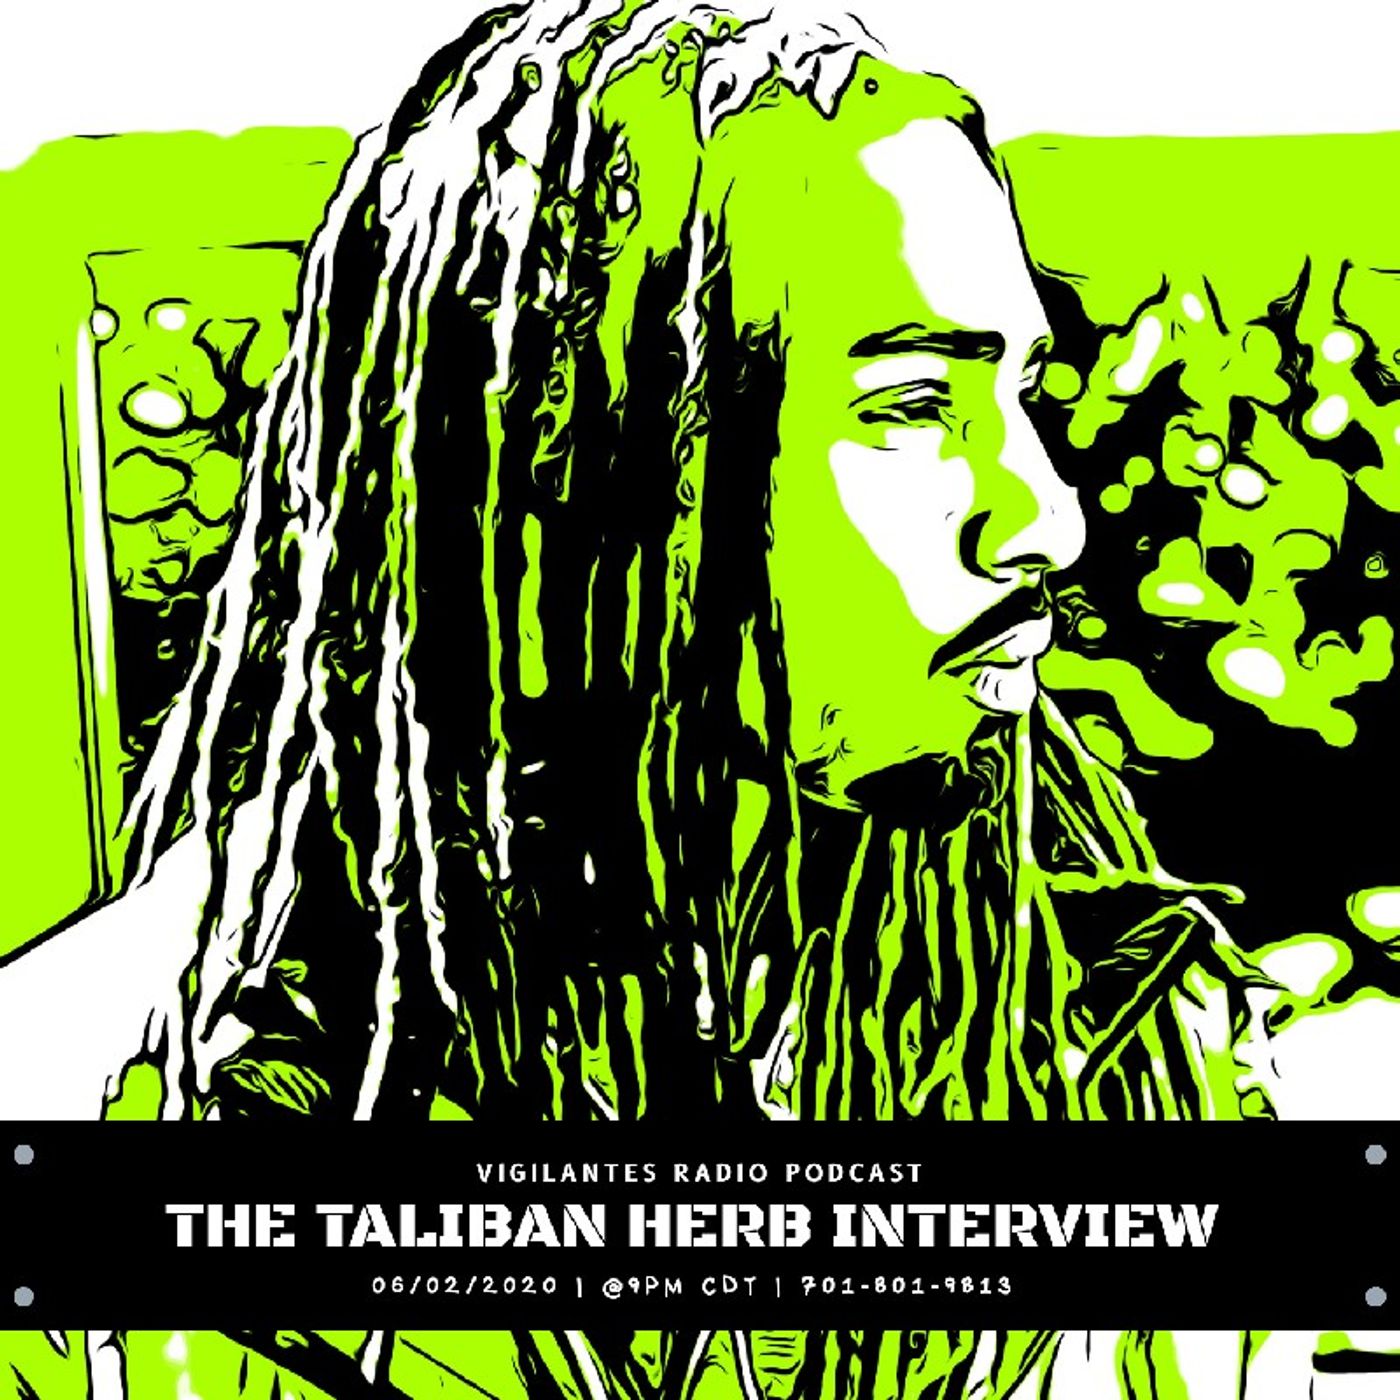 The Taliban Herb Interview. Image